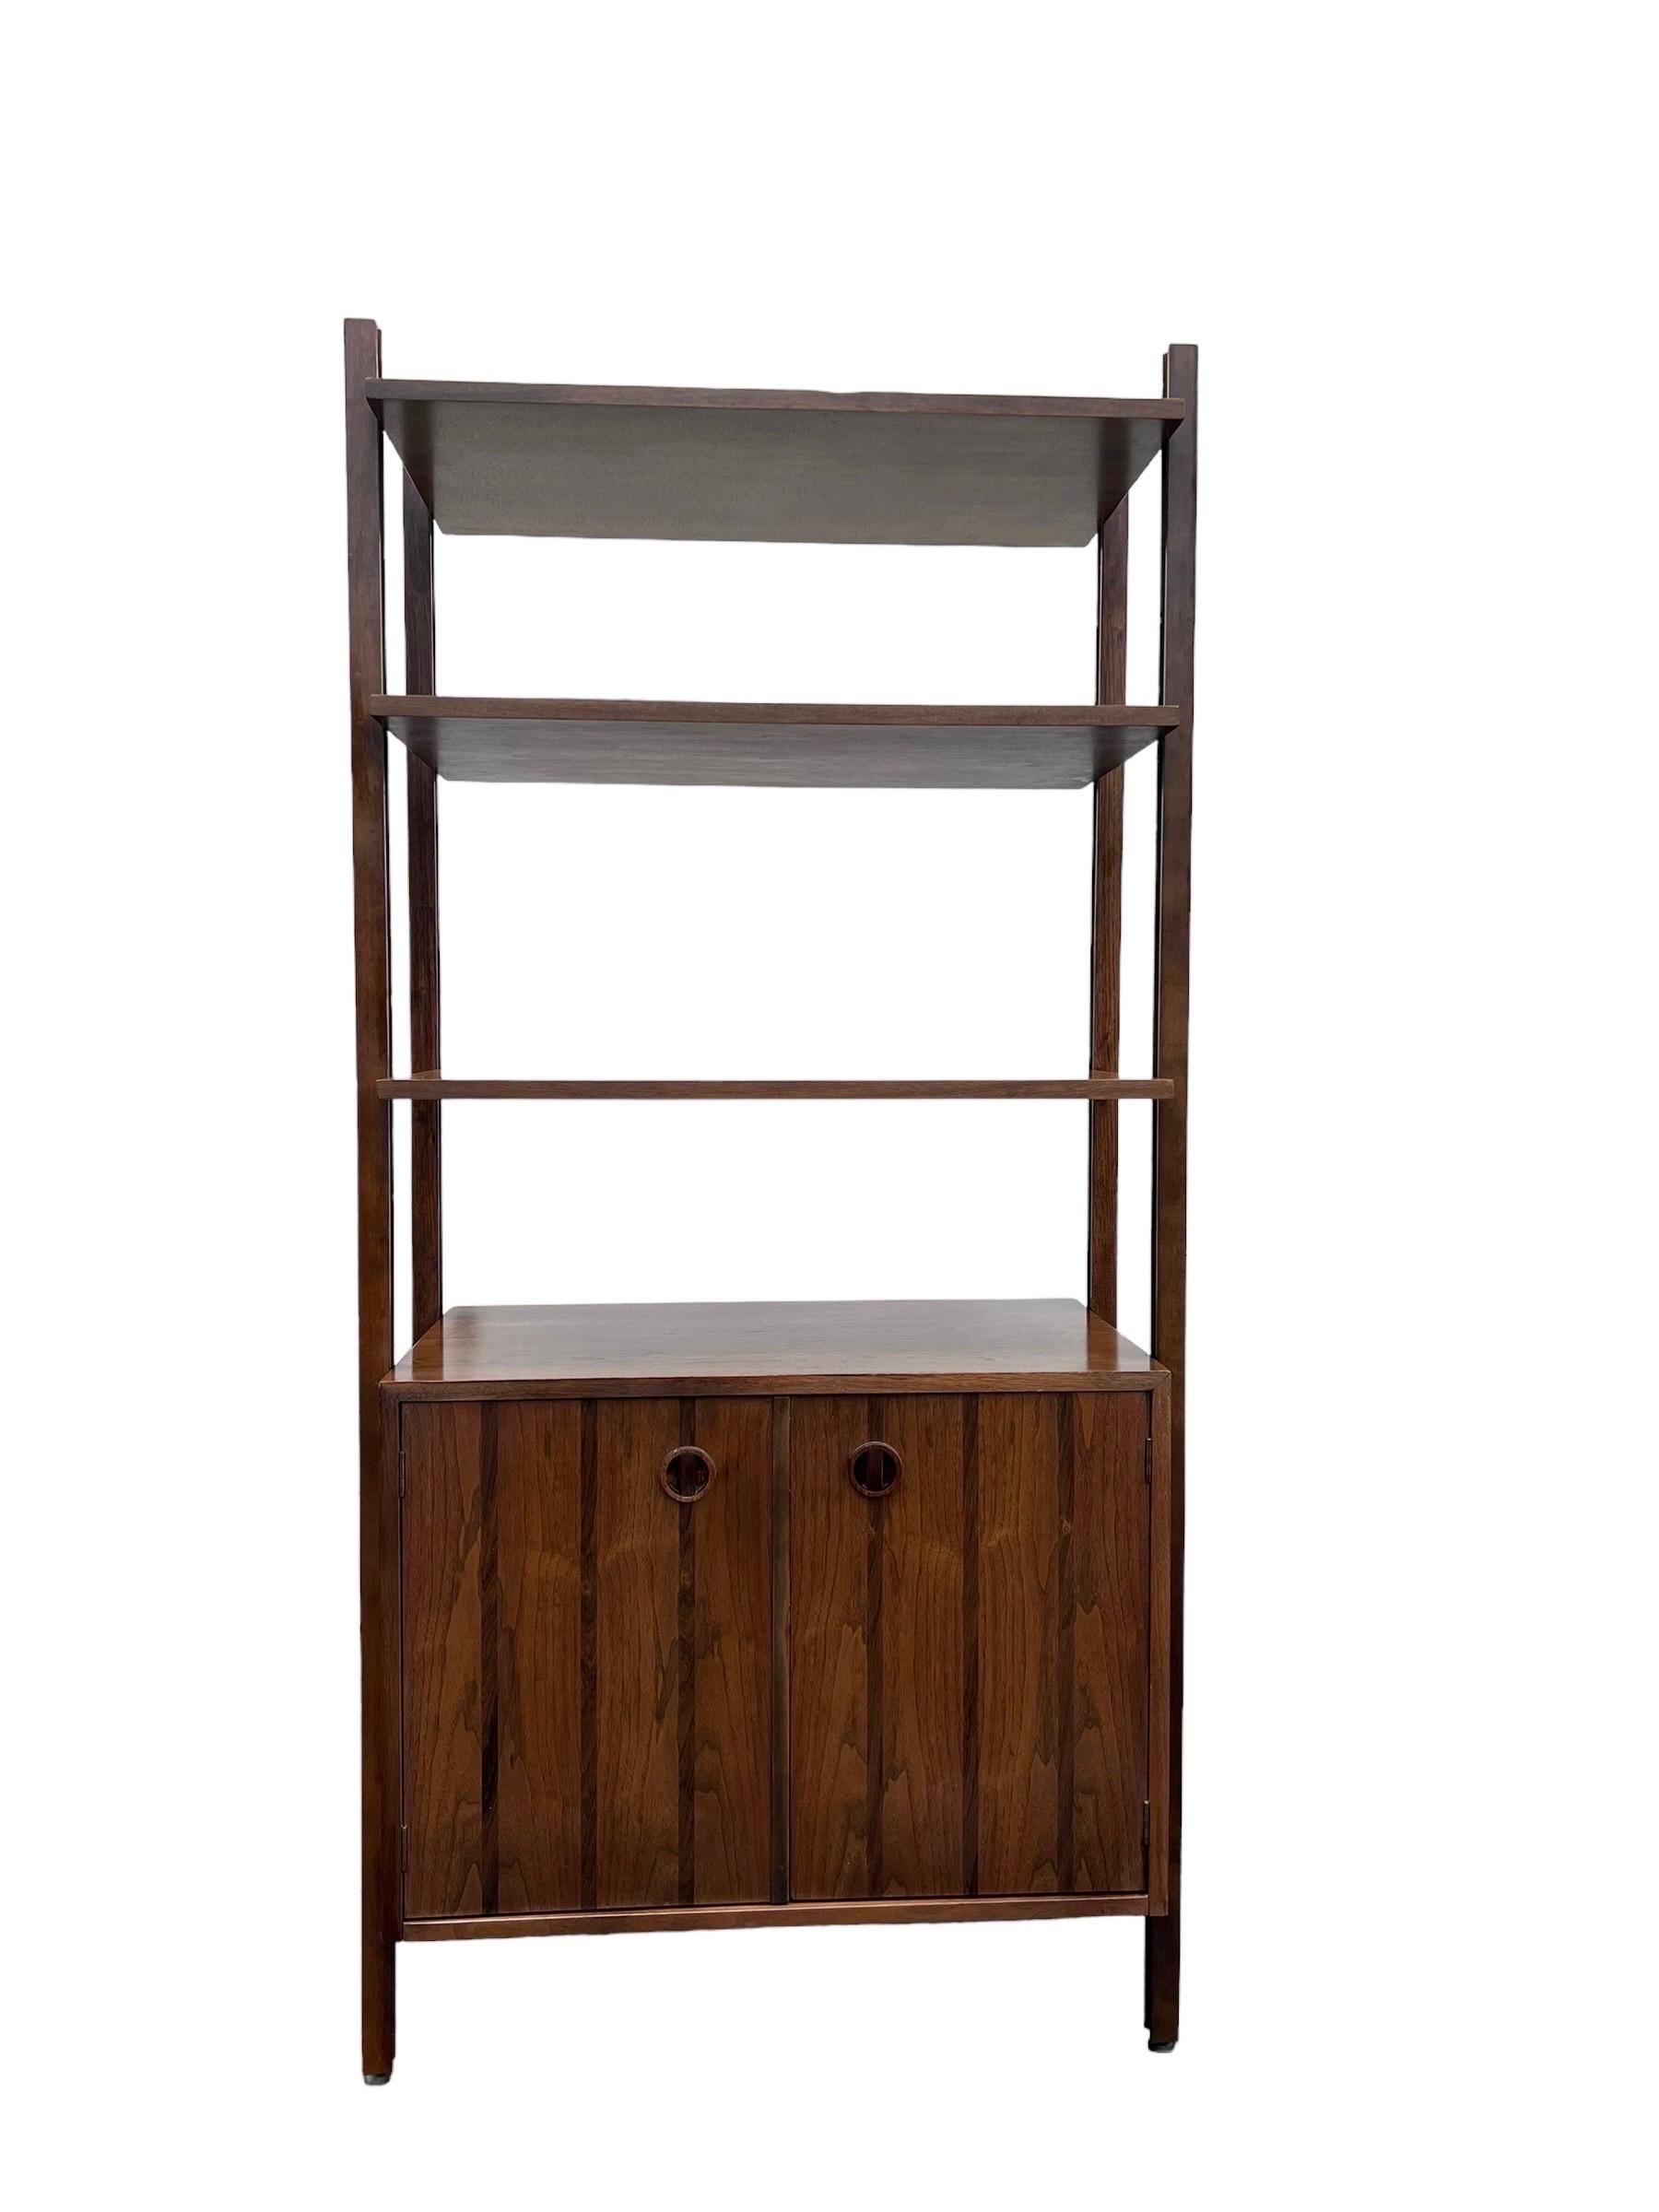 Rare 1-bay freestanding walnut wall unit by Stanley. This set is rare in its original form with cabinets and shelf. The bottom cabinet has a removable shelf. The height-wise location of the cabinets and the shelf are adjustable. This unit can be